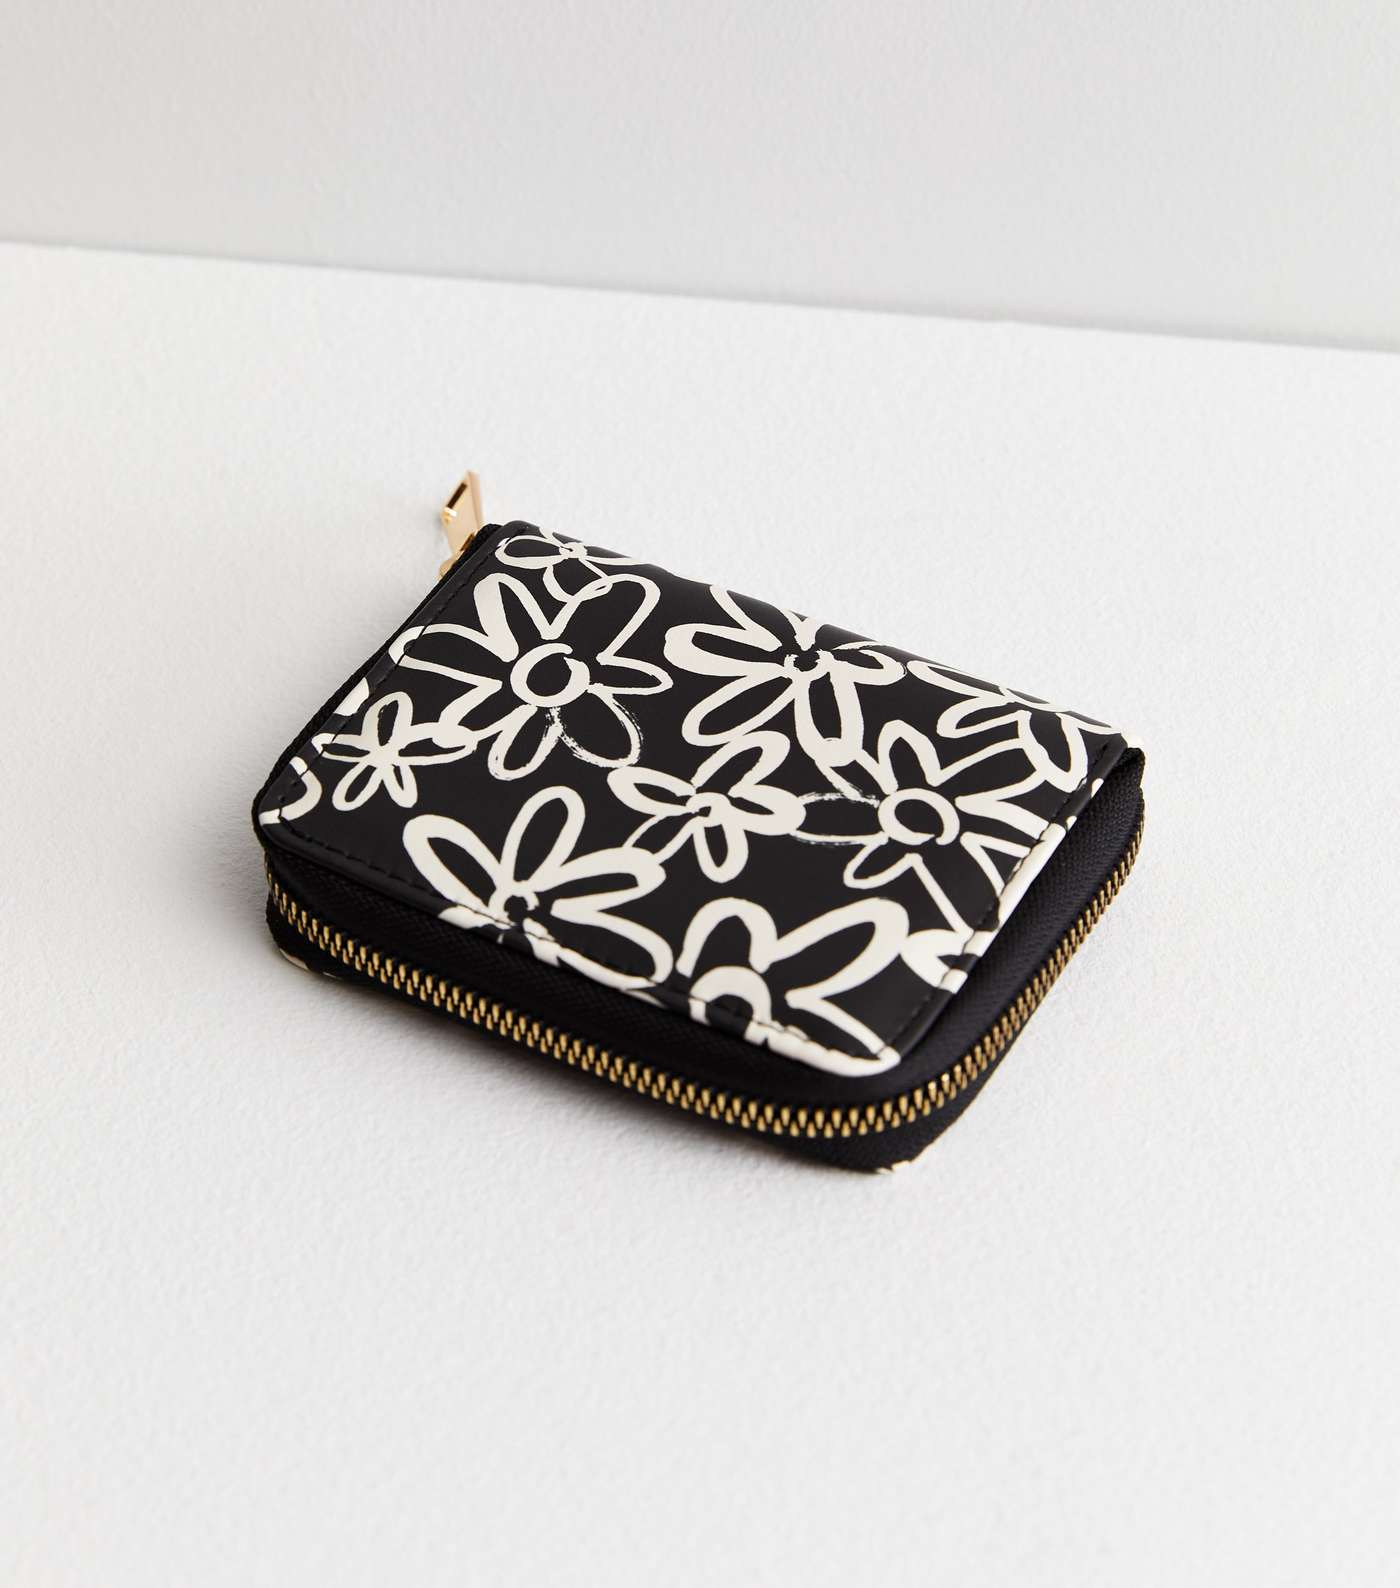 Black Floral Leather-Look Small Purse Image 2